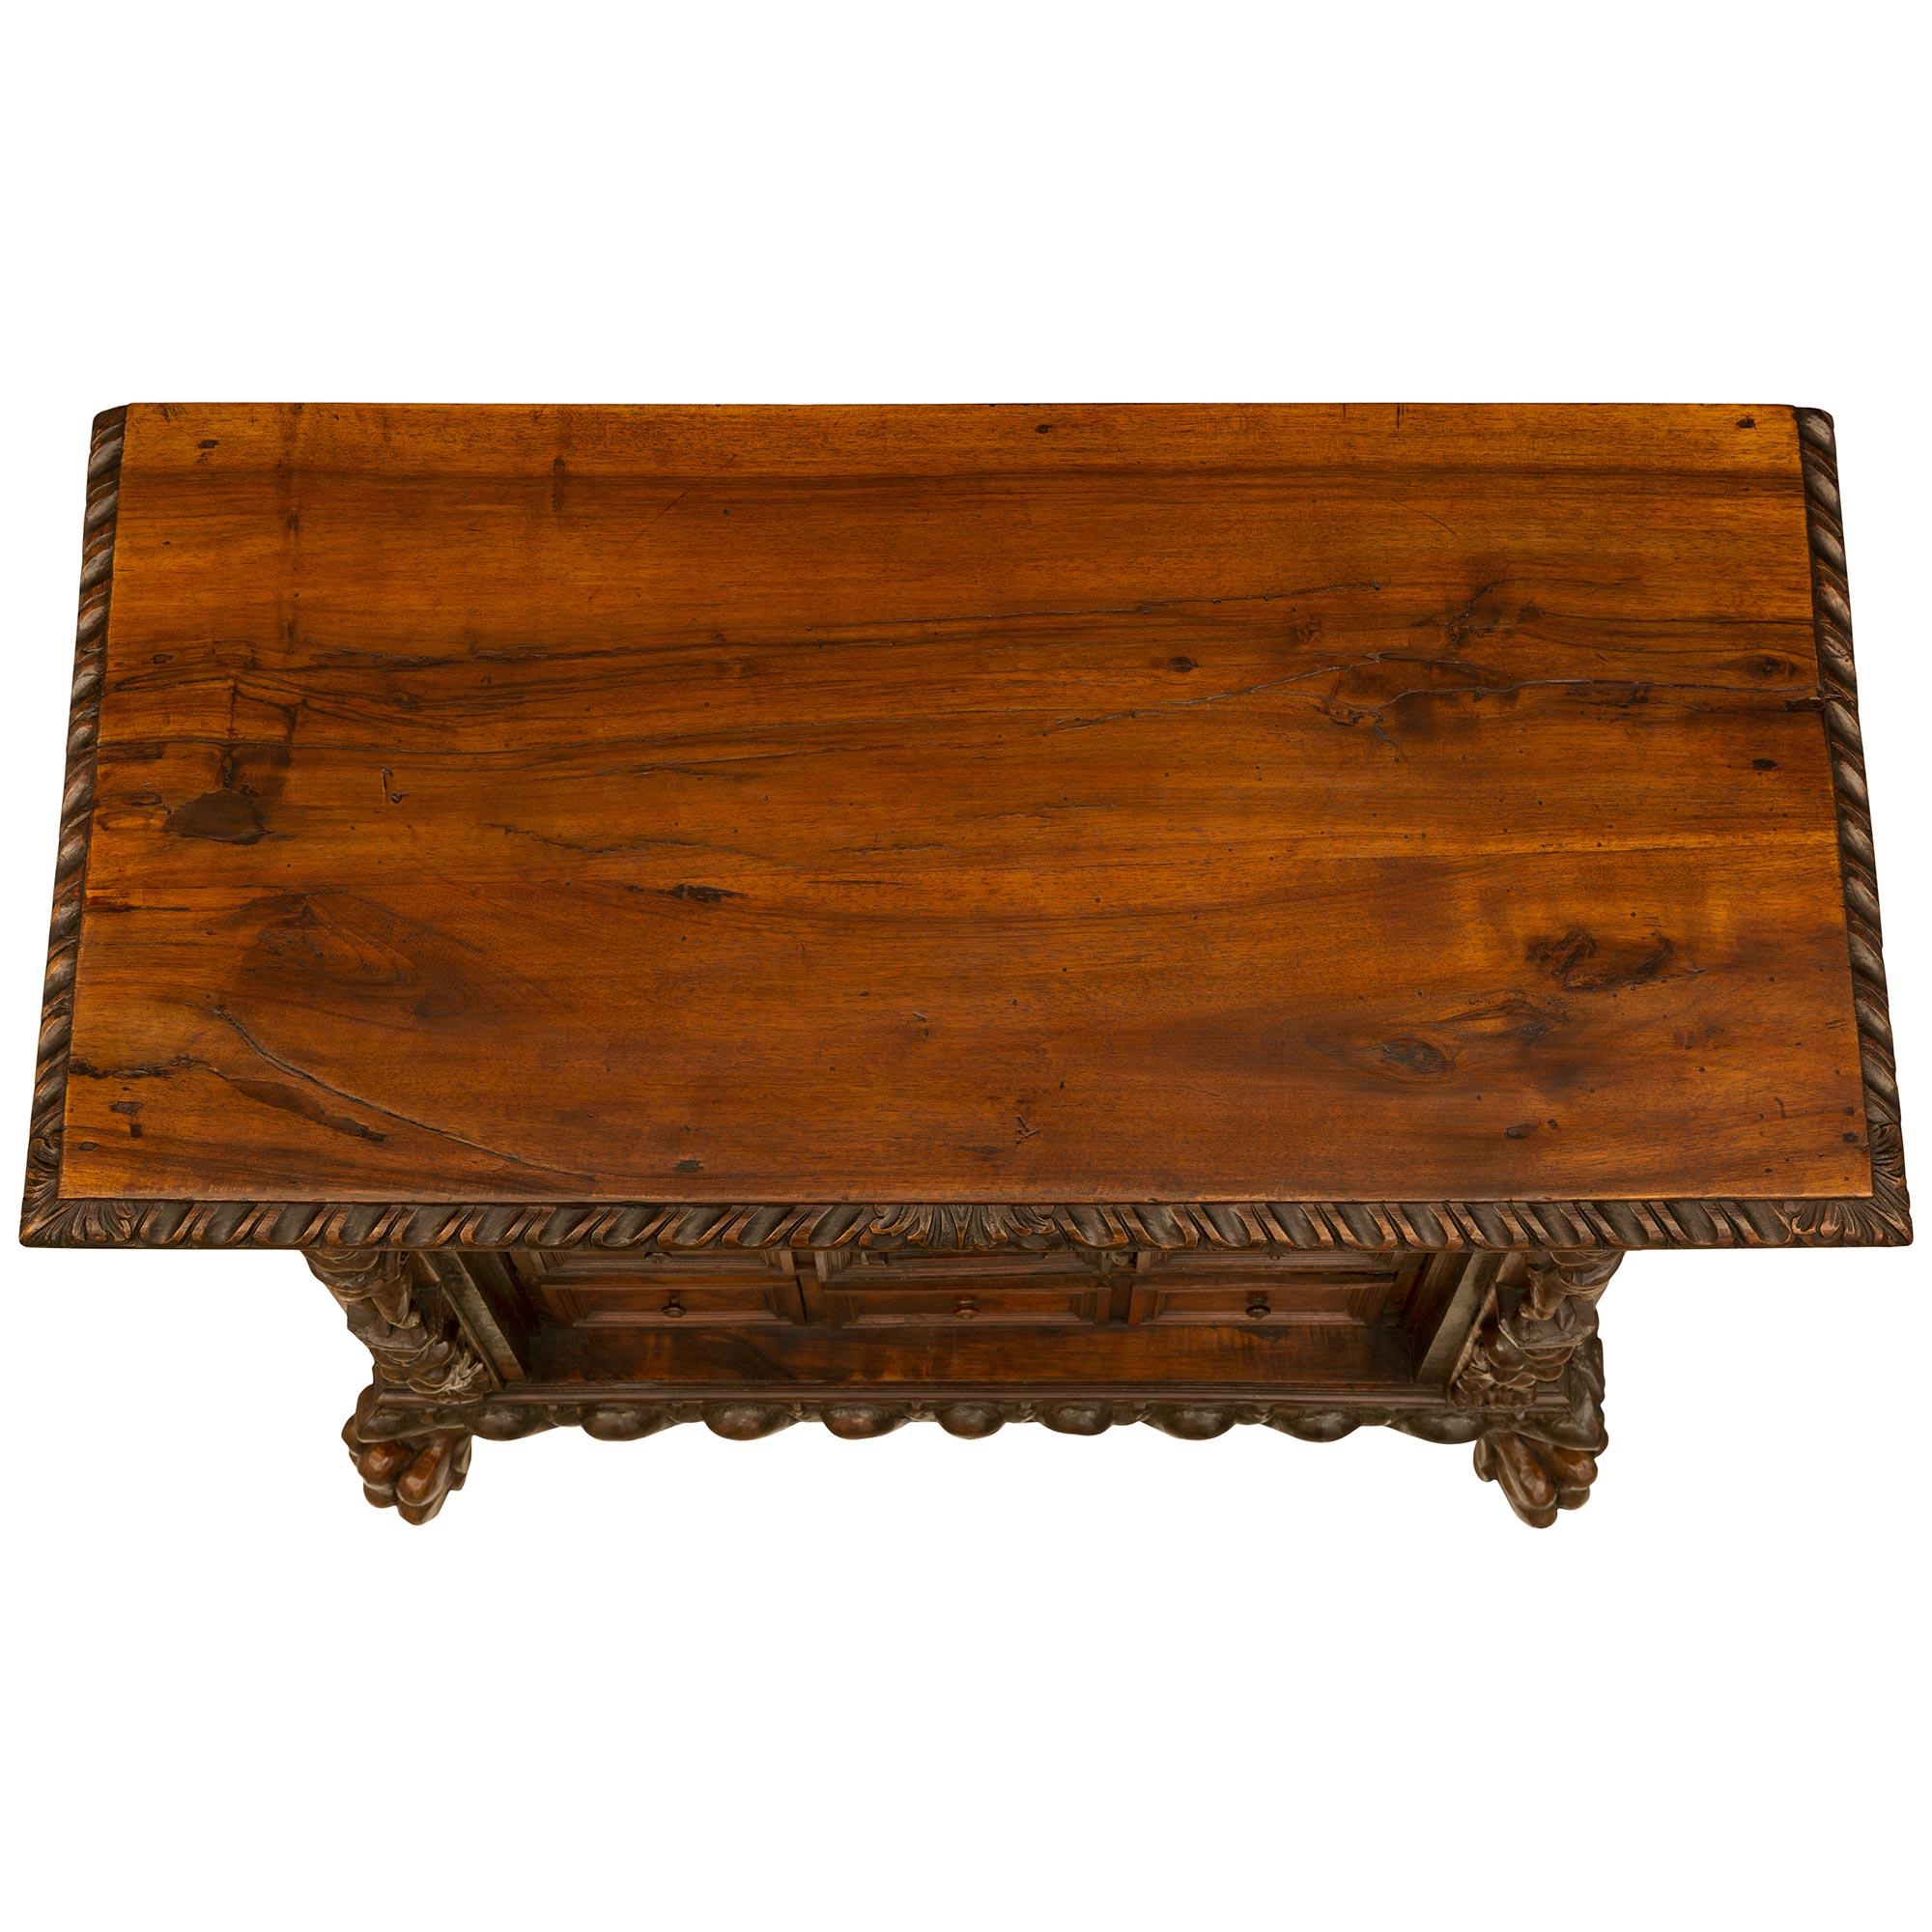 A handsome Italian 17th century Baroque period Walnut and burl Walnut cabinet. The smaller scale one door twelve drawer table top cabinet is raised by impressive paw feet below a large gadroon designed wraparound band. At the center is a single